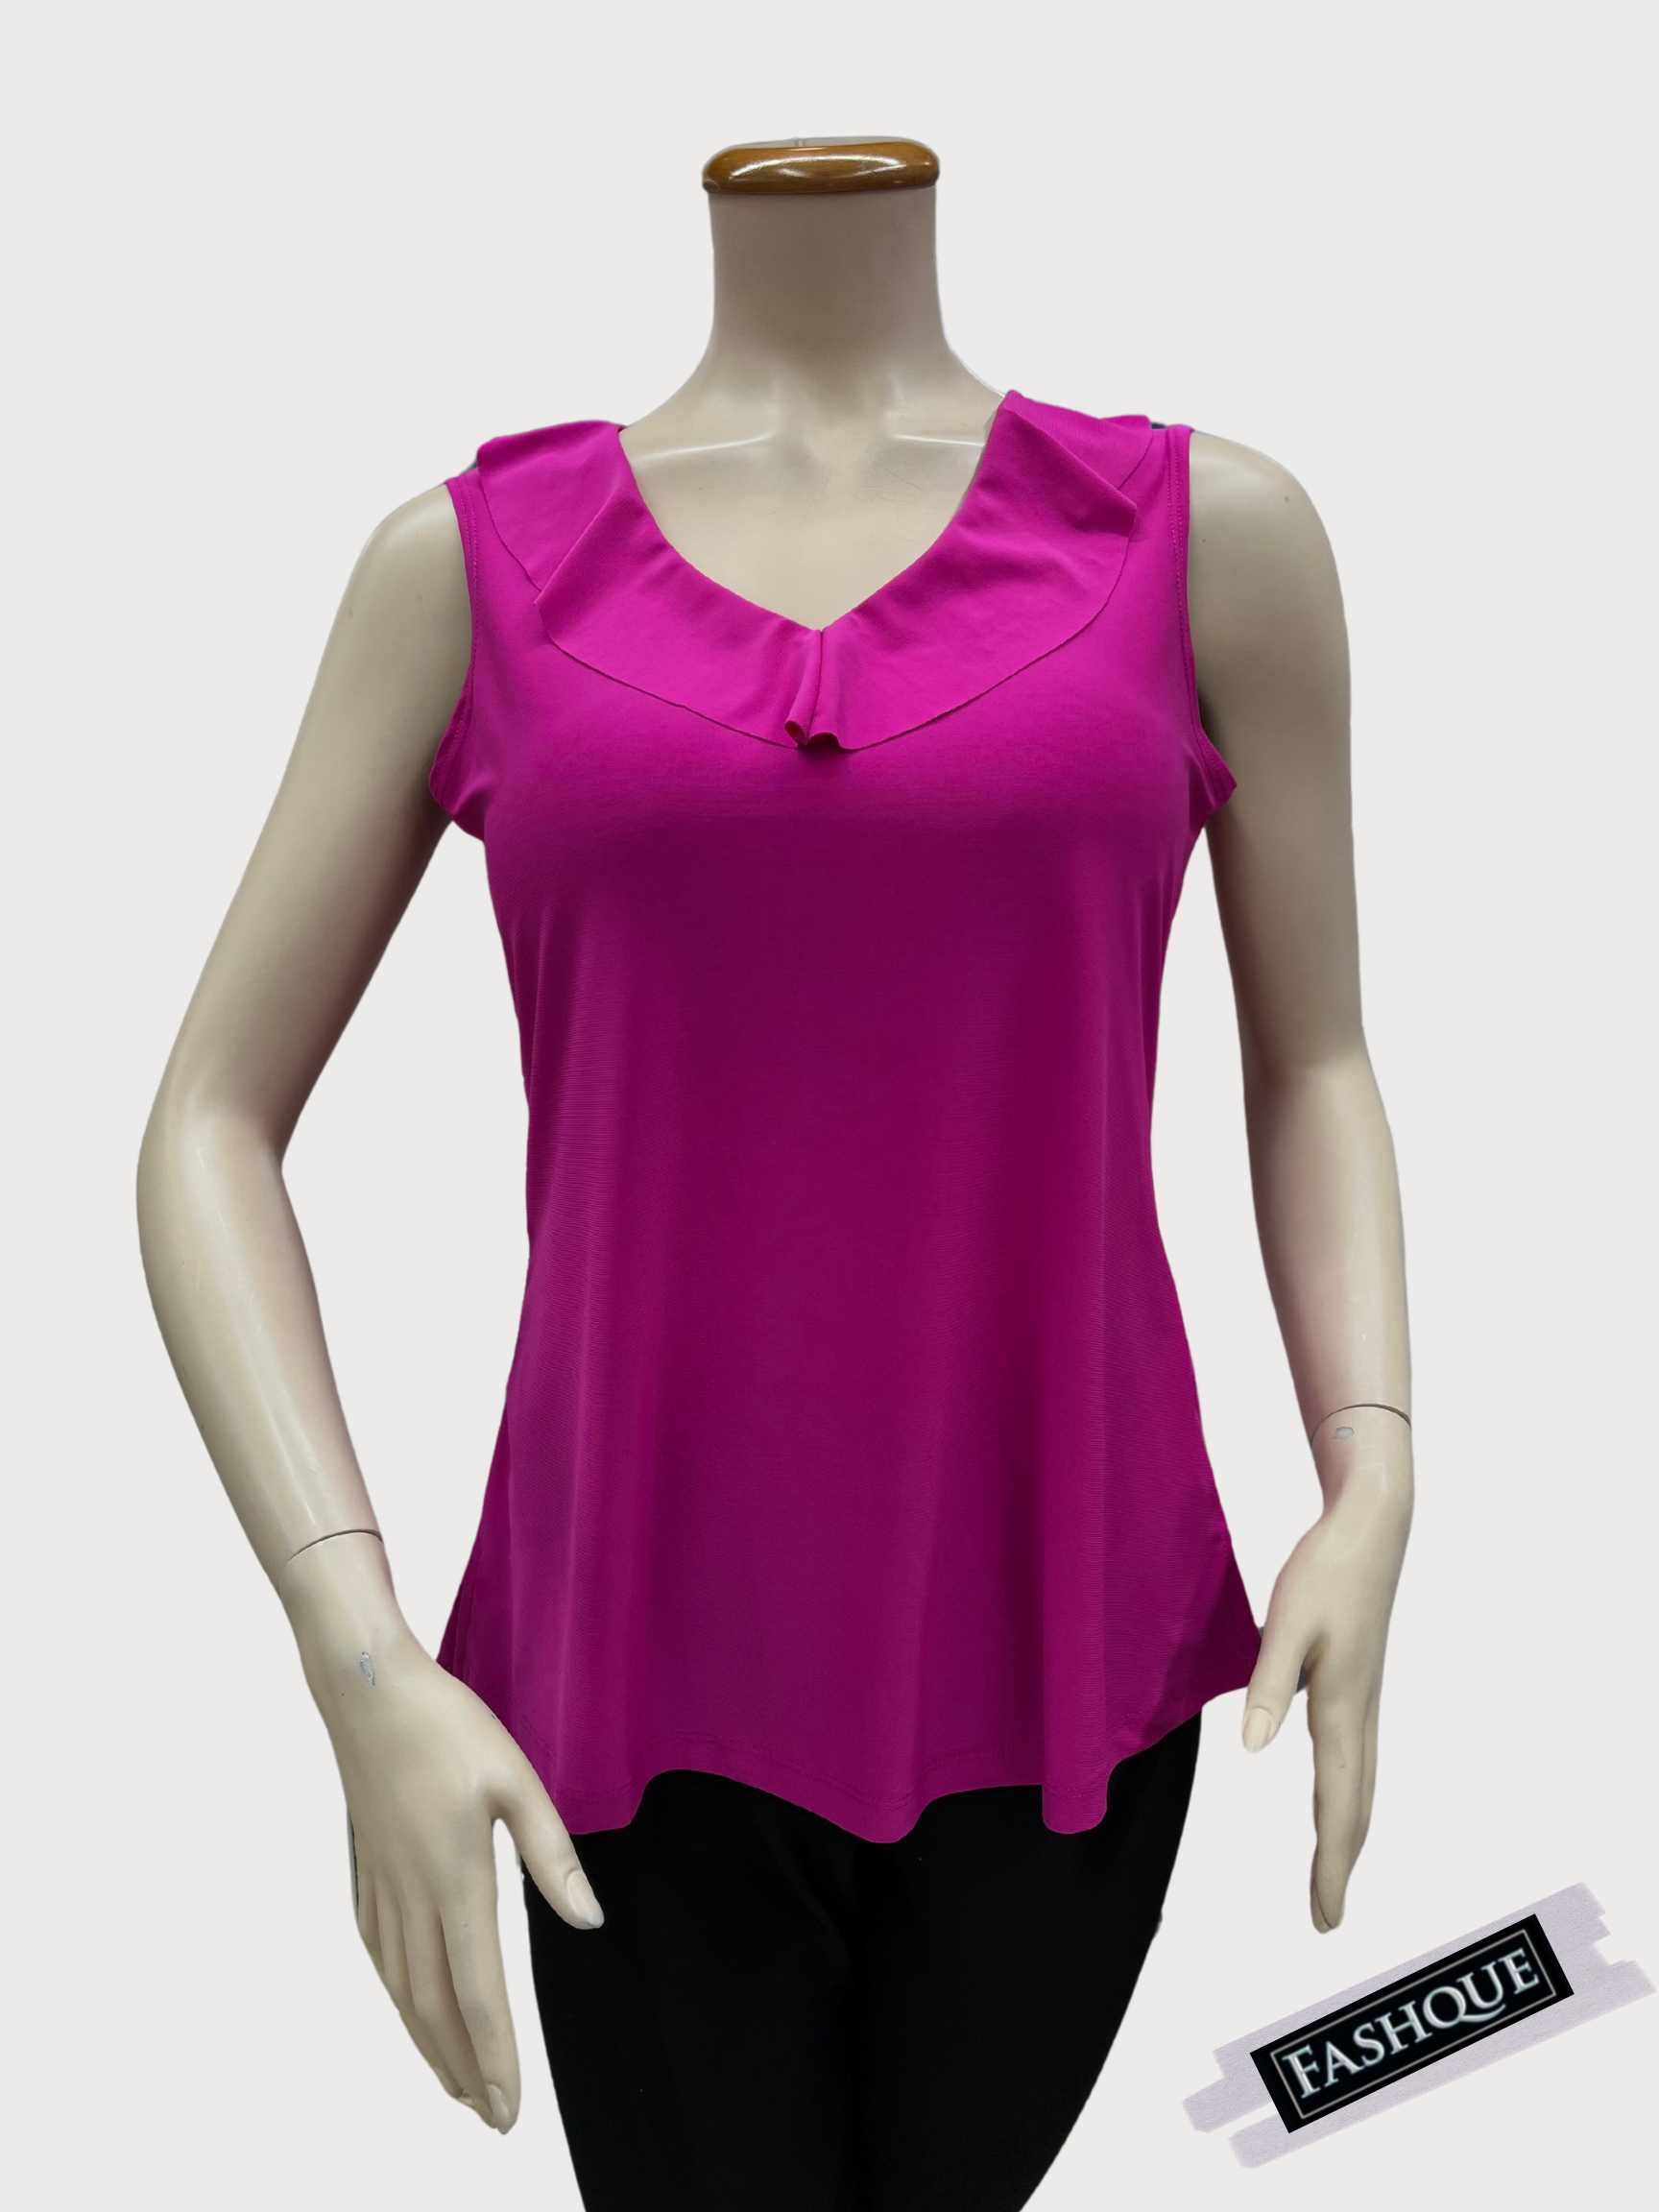 FASHQUE - Chic Sleeveless V-Neck Solid Color Top with Ruffle Neckline - T036